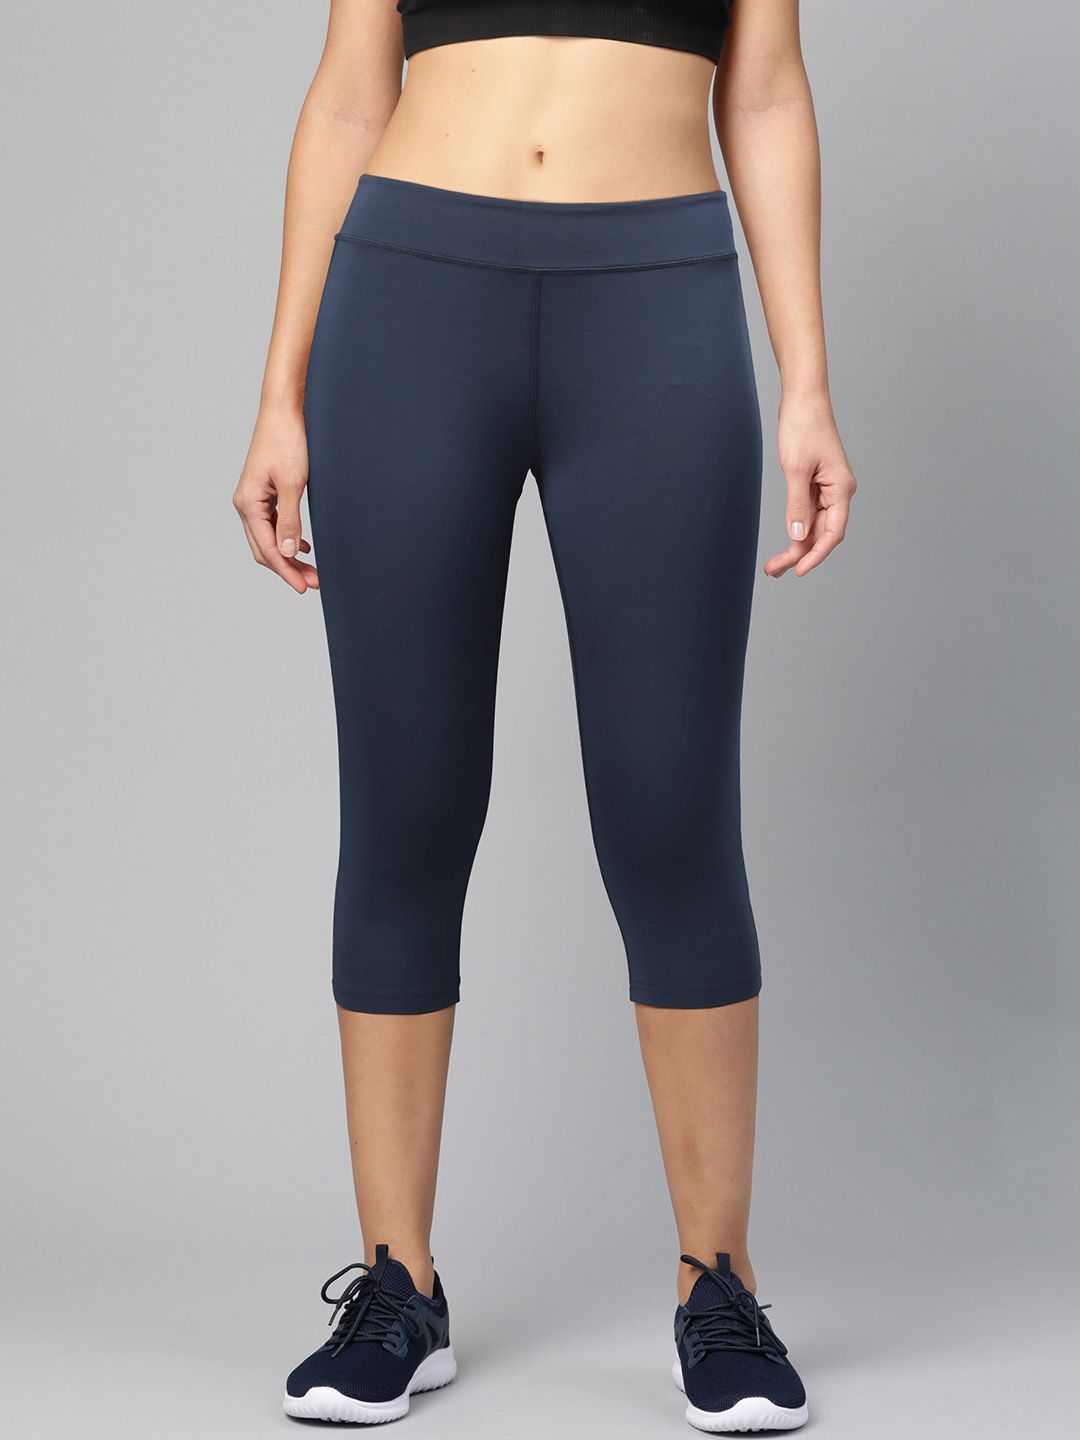 Reebok Women Navy Solid Workout Ready PP Capri Training Tights Price in India